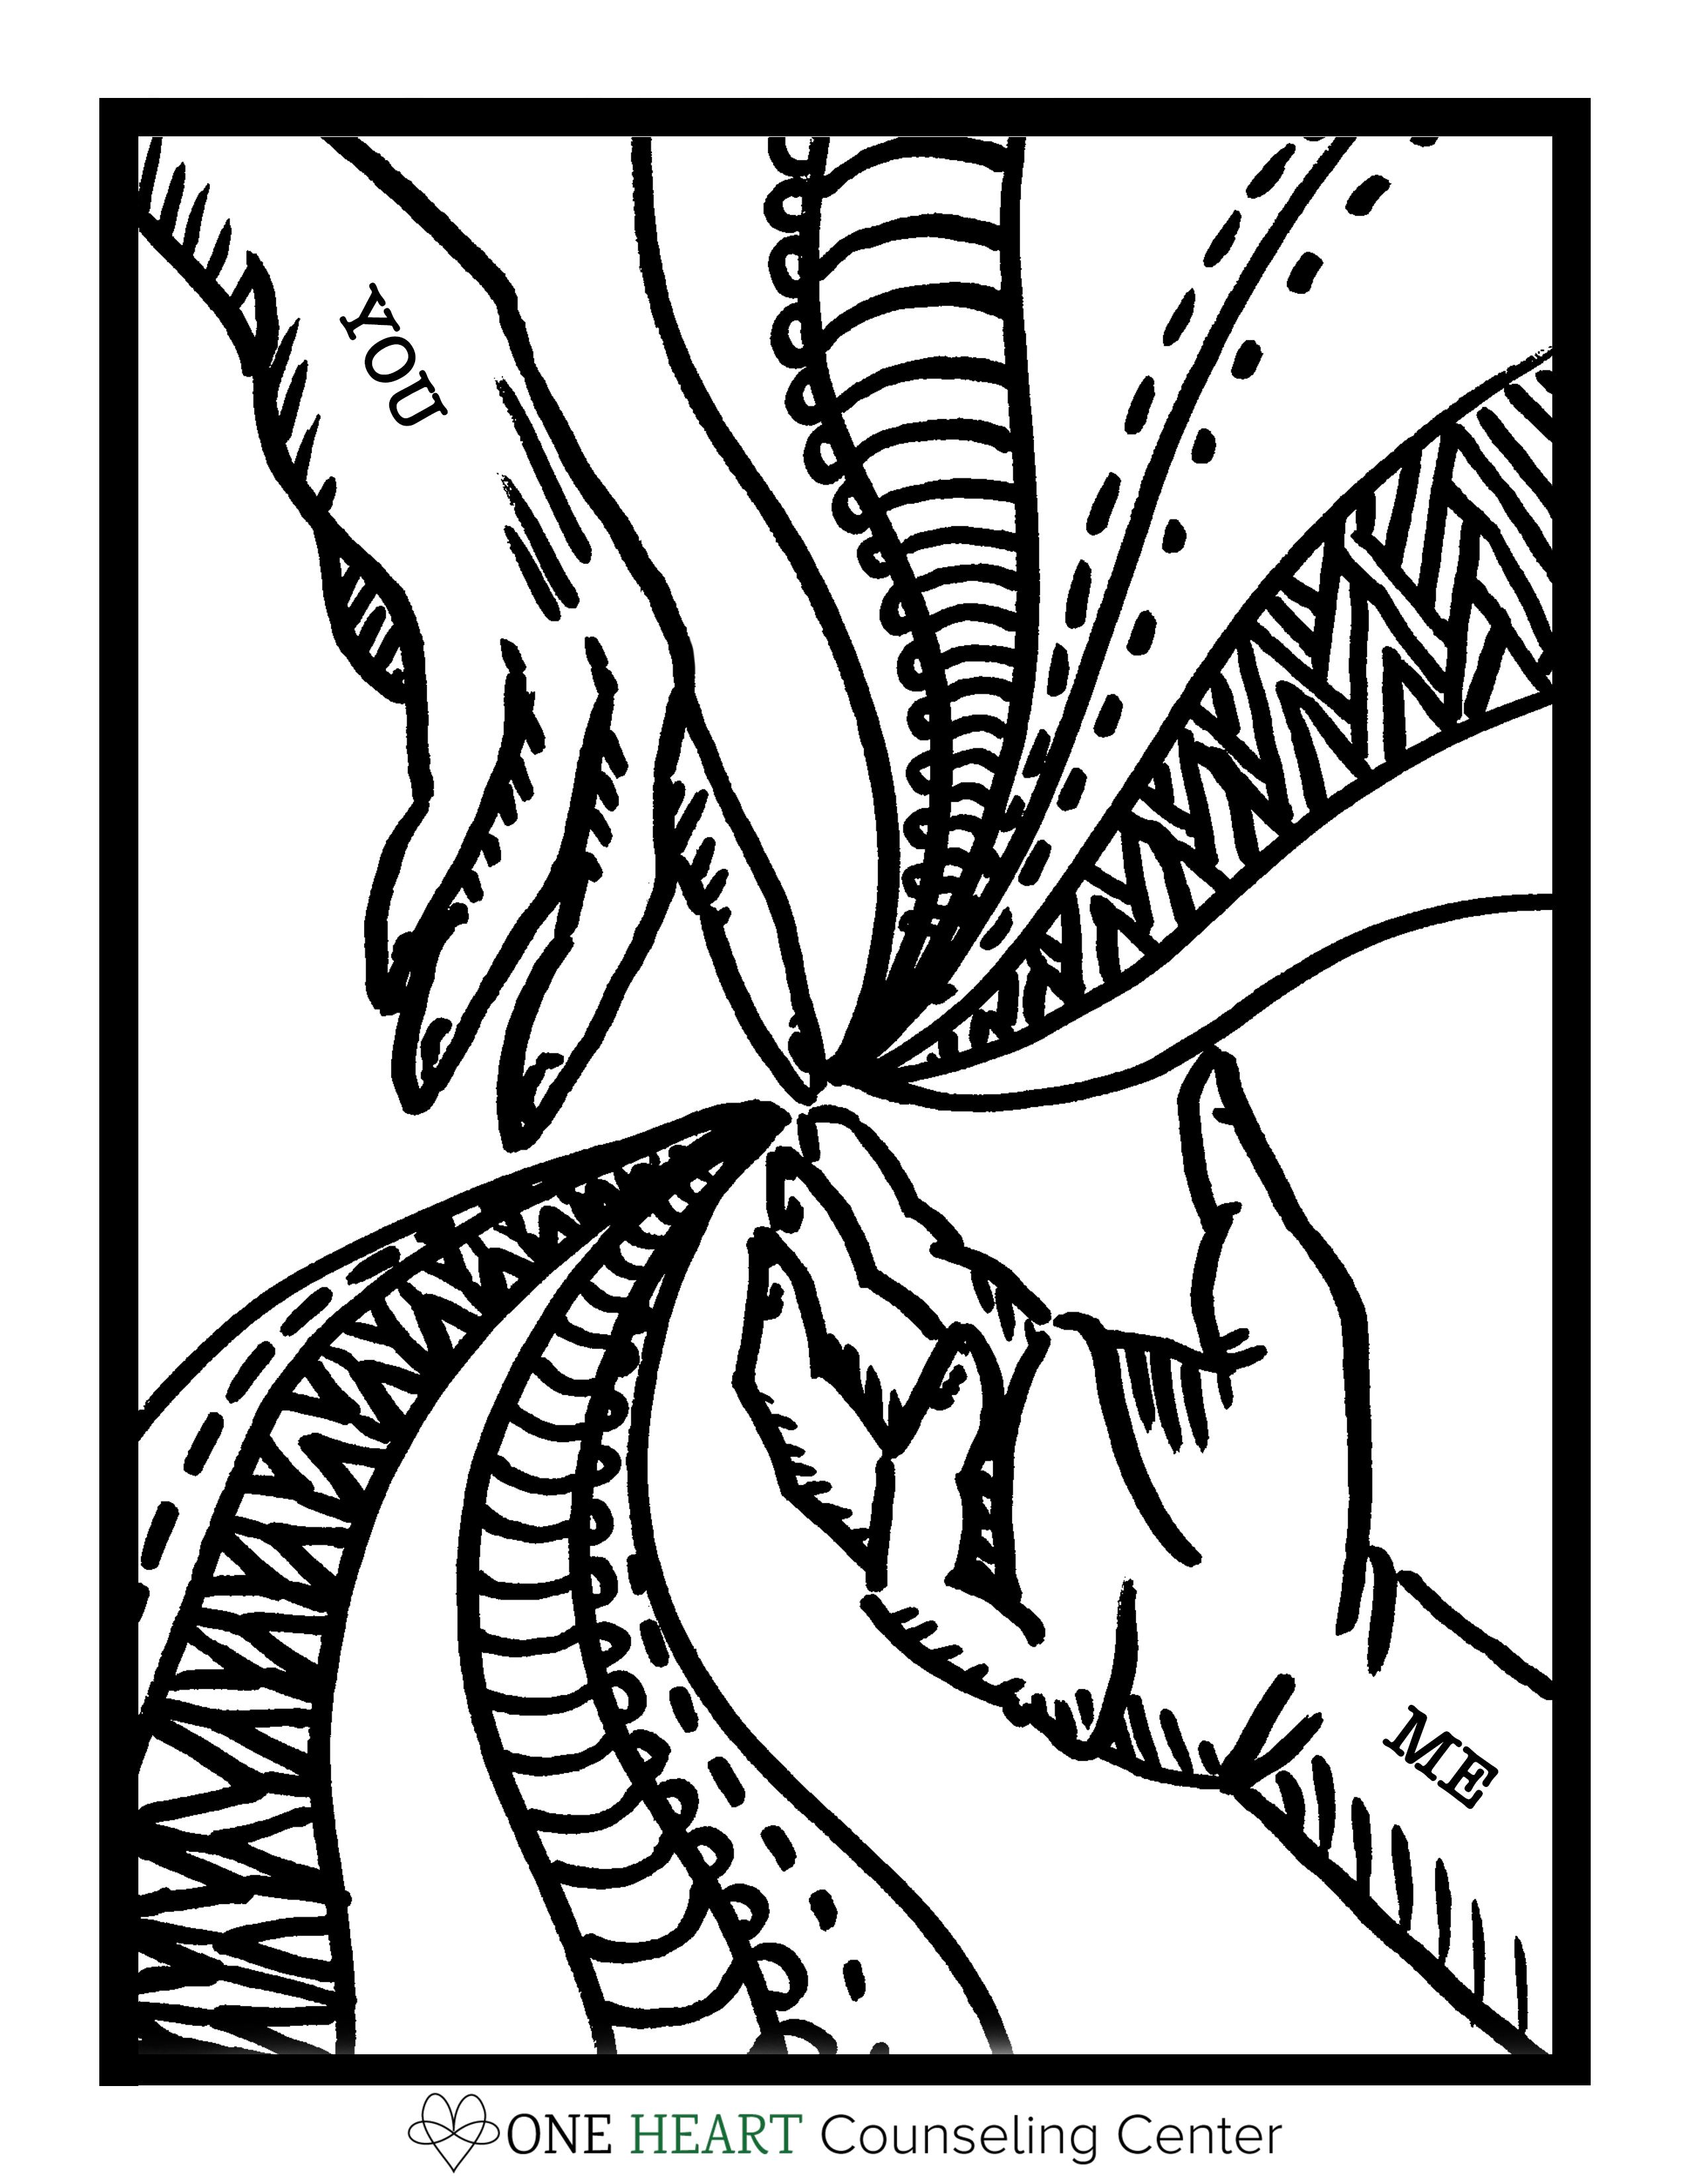 Free Art Therapy Coloring Page, One Heart Counseling Center